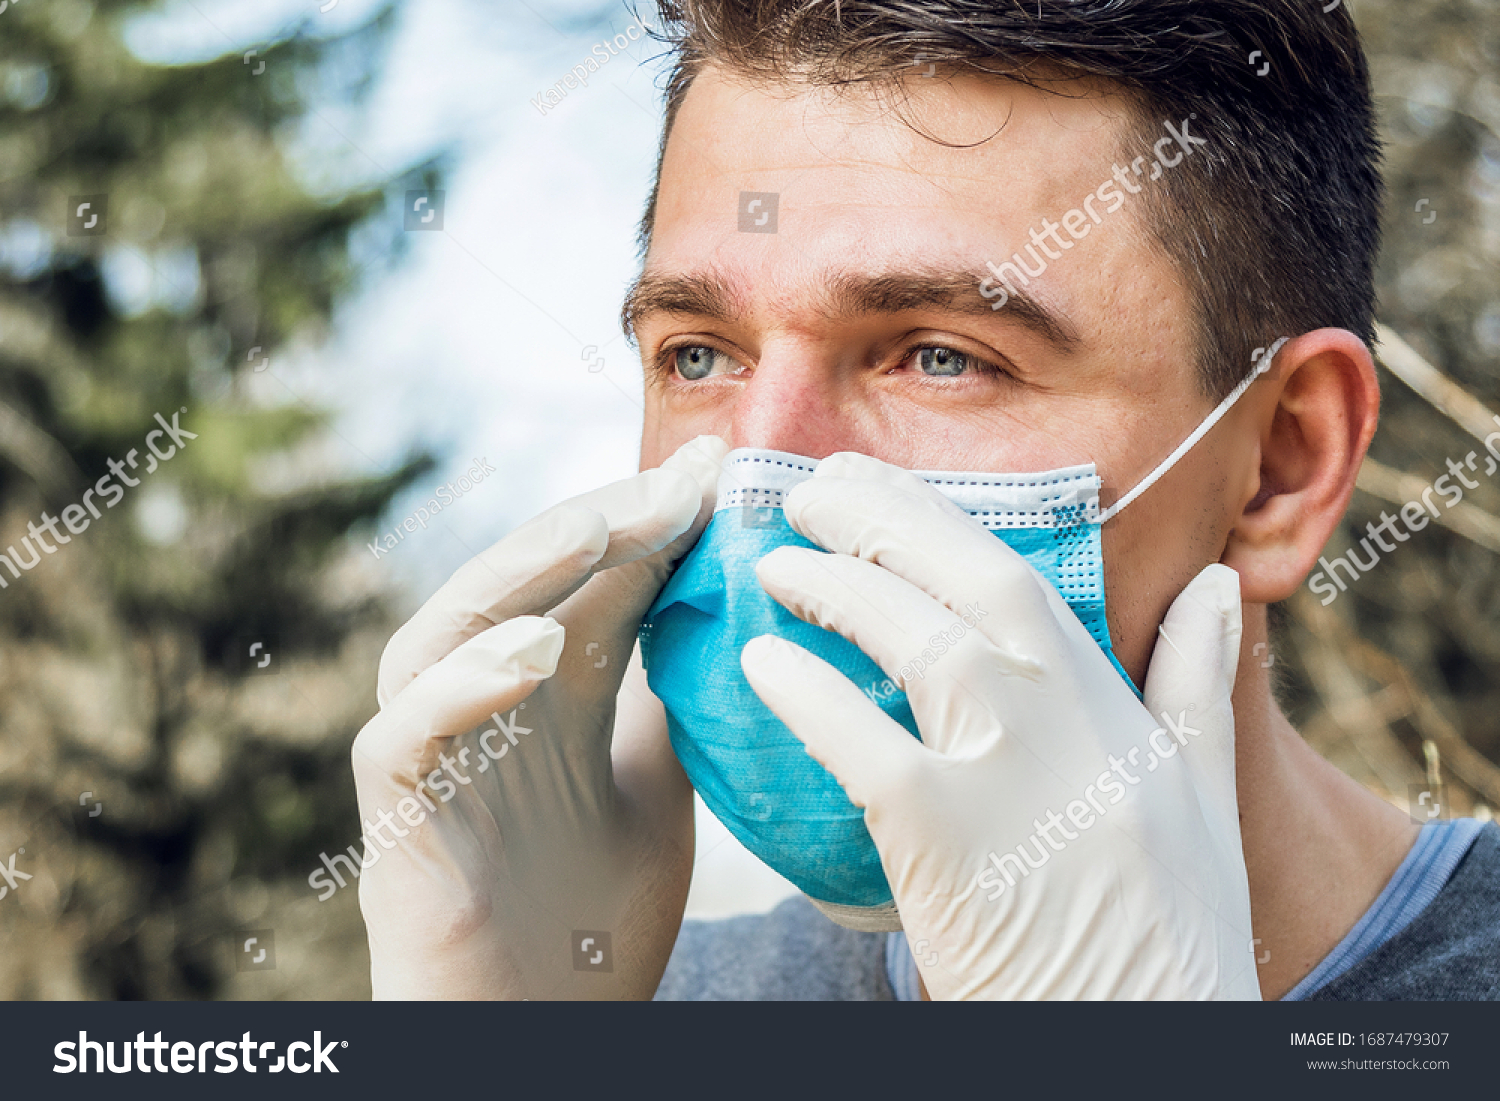 Portrait of man wearing a protective mask, walking in the Park. Corona Virus Protection. #1687479307